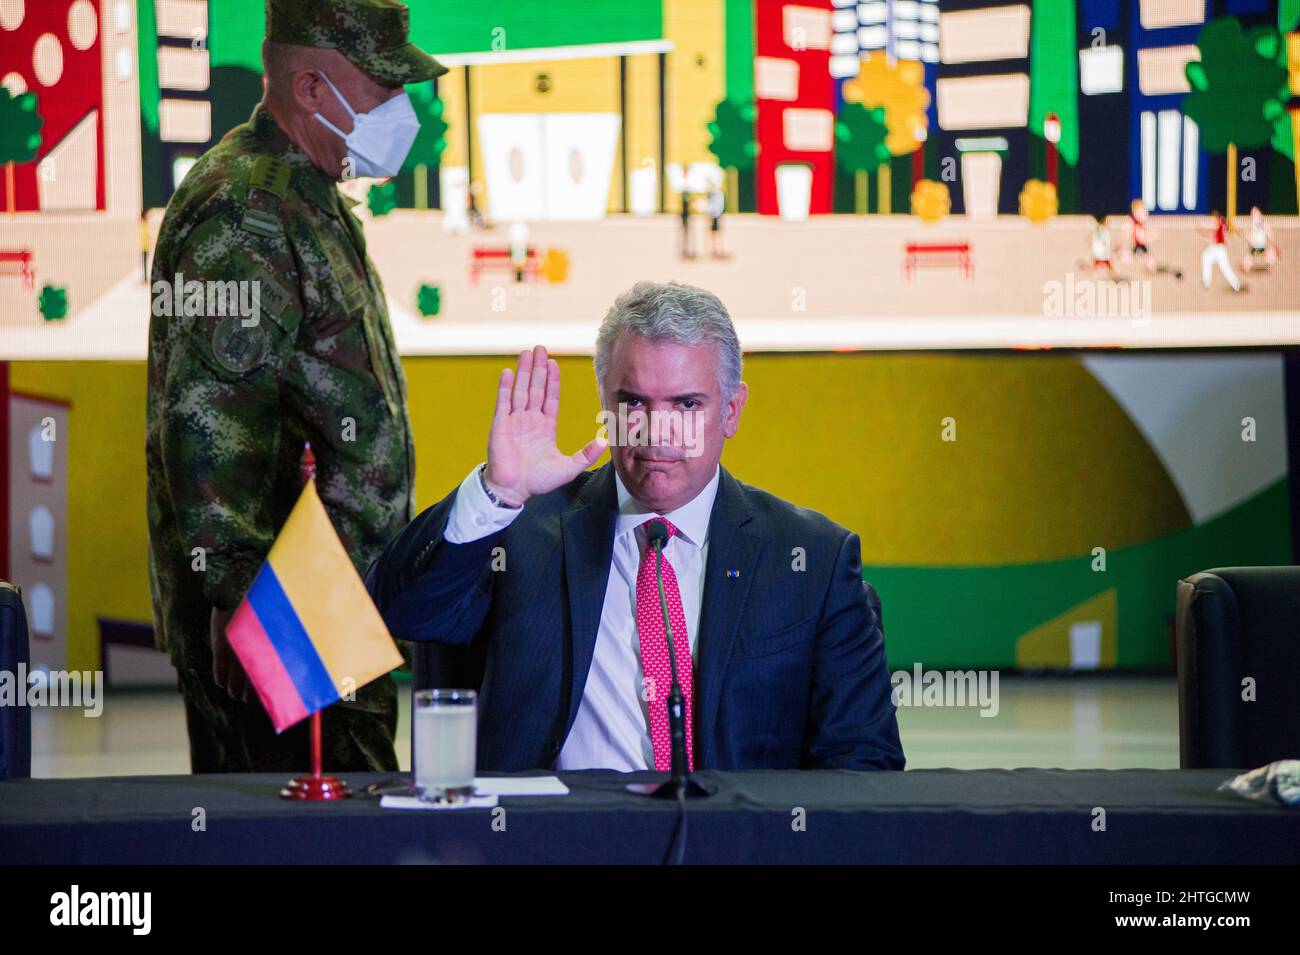 Colombia's president Ivan Duque Marquez gives a speech during the inauguration ceremony of the Week of Citizen Security 'Semana de Seguridad Ciudadana' 2022, in Bogota, Colombia where 26 countries take part from February 28 to March 3. On February 28, 2022. Stock Photo